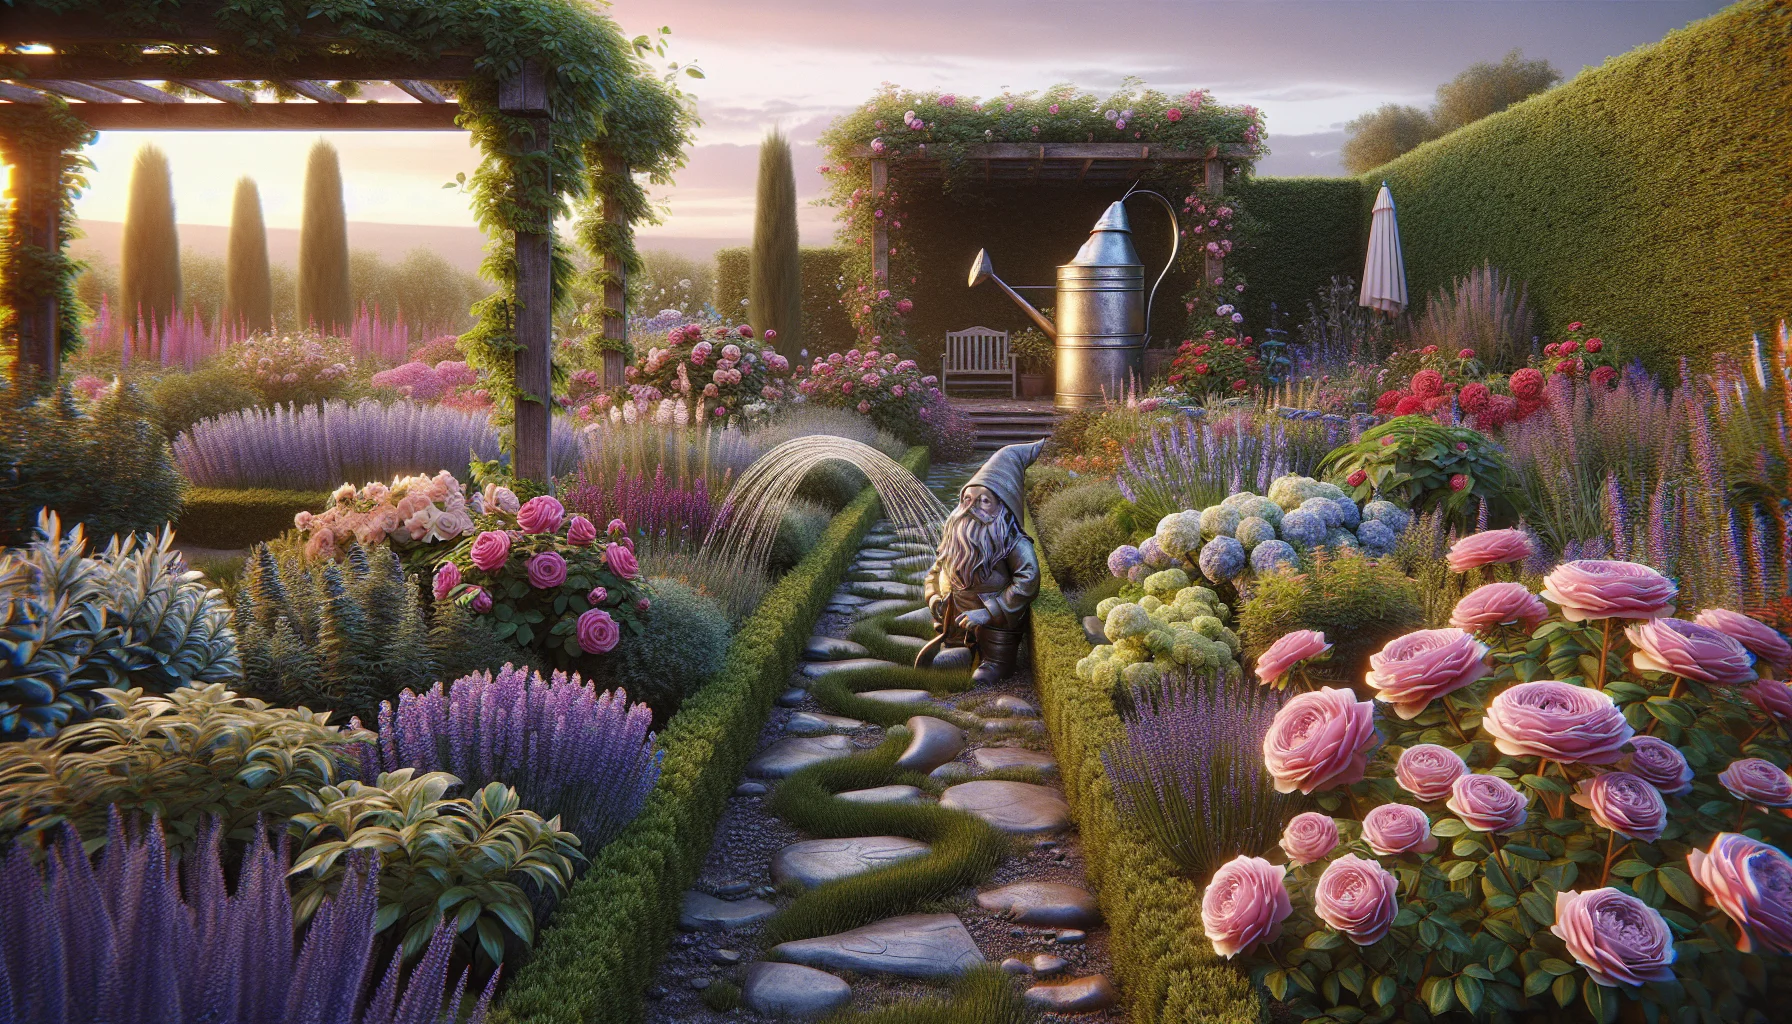 Create a realistic and whimsical scene of a beautifully elegant garden filled with a diverse range of plants - everything from roses, lavender, and hydrangeas to name a few, with neatly trimmed hedges, stone pathways weaving through, and a rustic wooden bench under a pergola. The garden is located in an open field with the soft glow of a sunset in the backdrop. A novel twist to the scene would be a humorous statue of a gnome wearing a gardener's hat, watering the colorful flowers with a gleaming, over-sized watering can. This image should exude the charm of gardening and entice people, conveying the joy and whimsy involved in gardening.